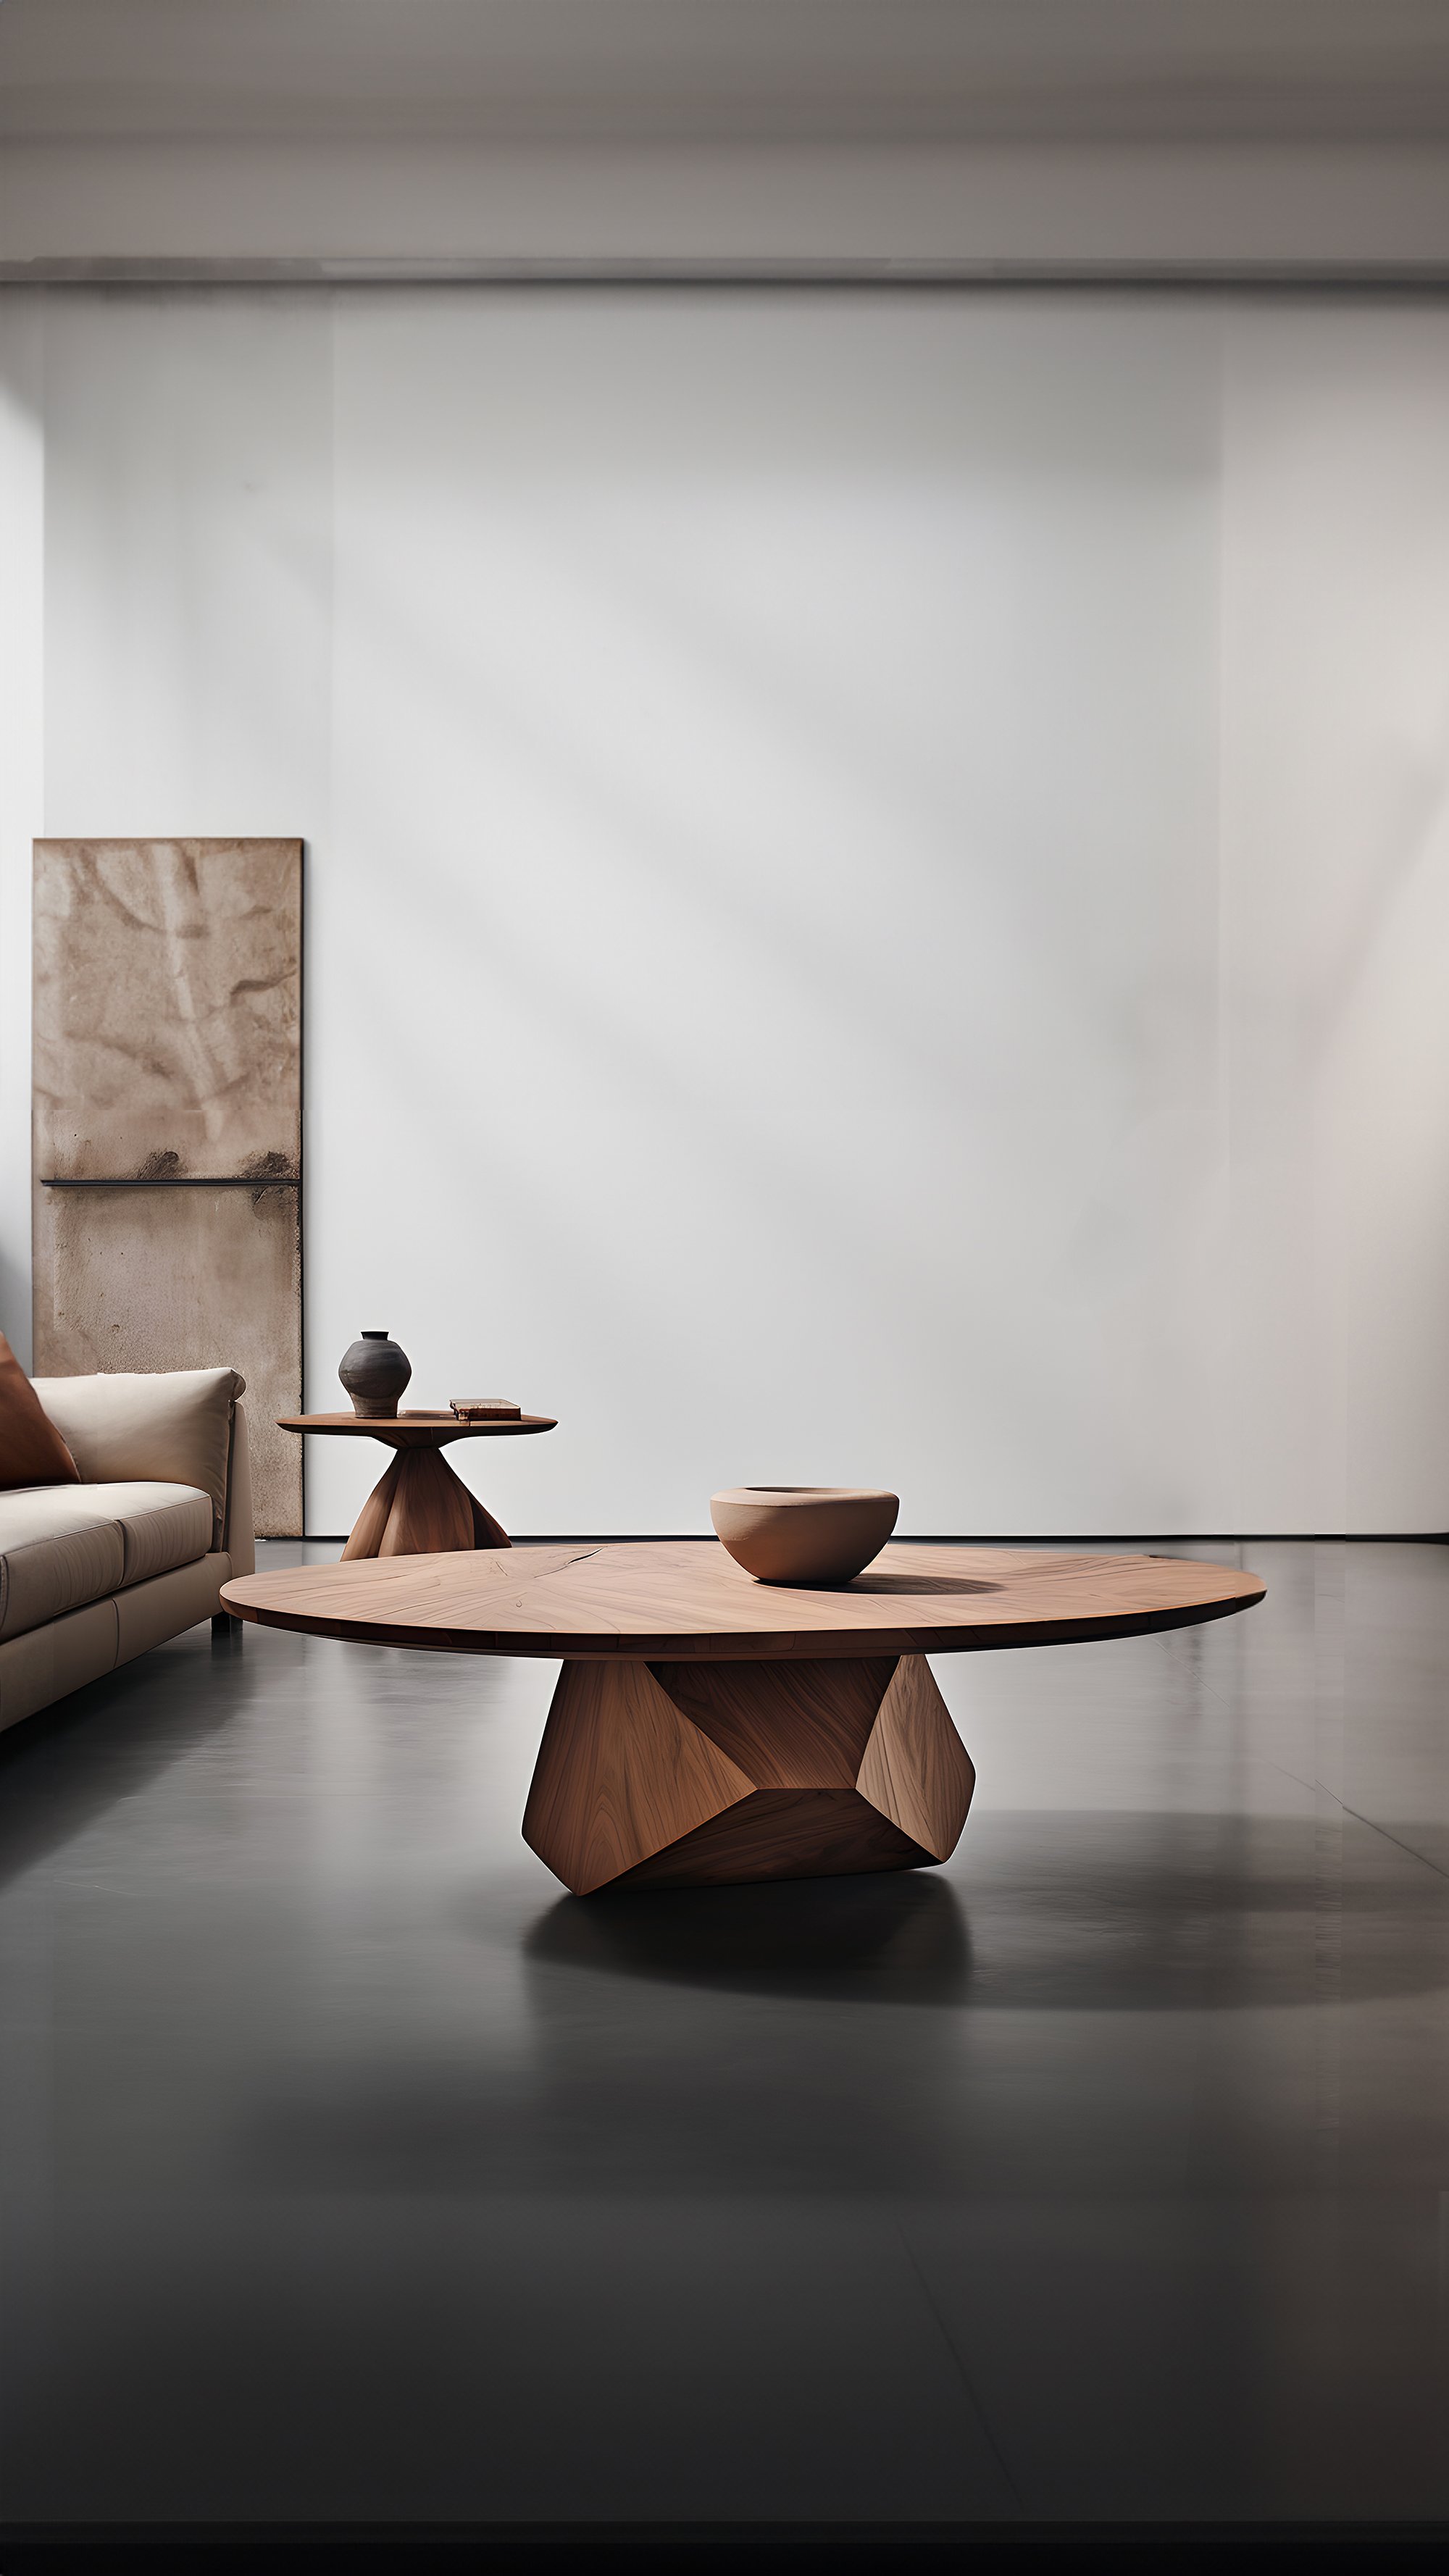 Sculptural Coffee Table Made of Solid Wood, Center Table Solace S39 by Joel Escalona — 7.jpg